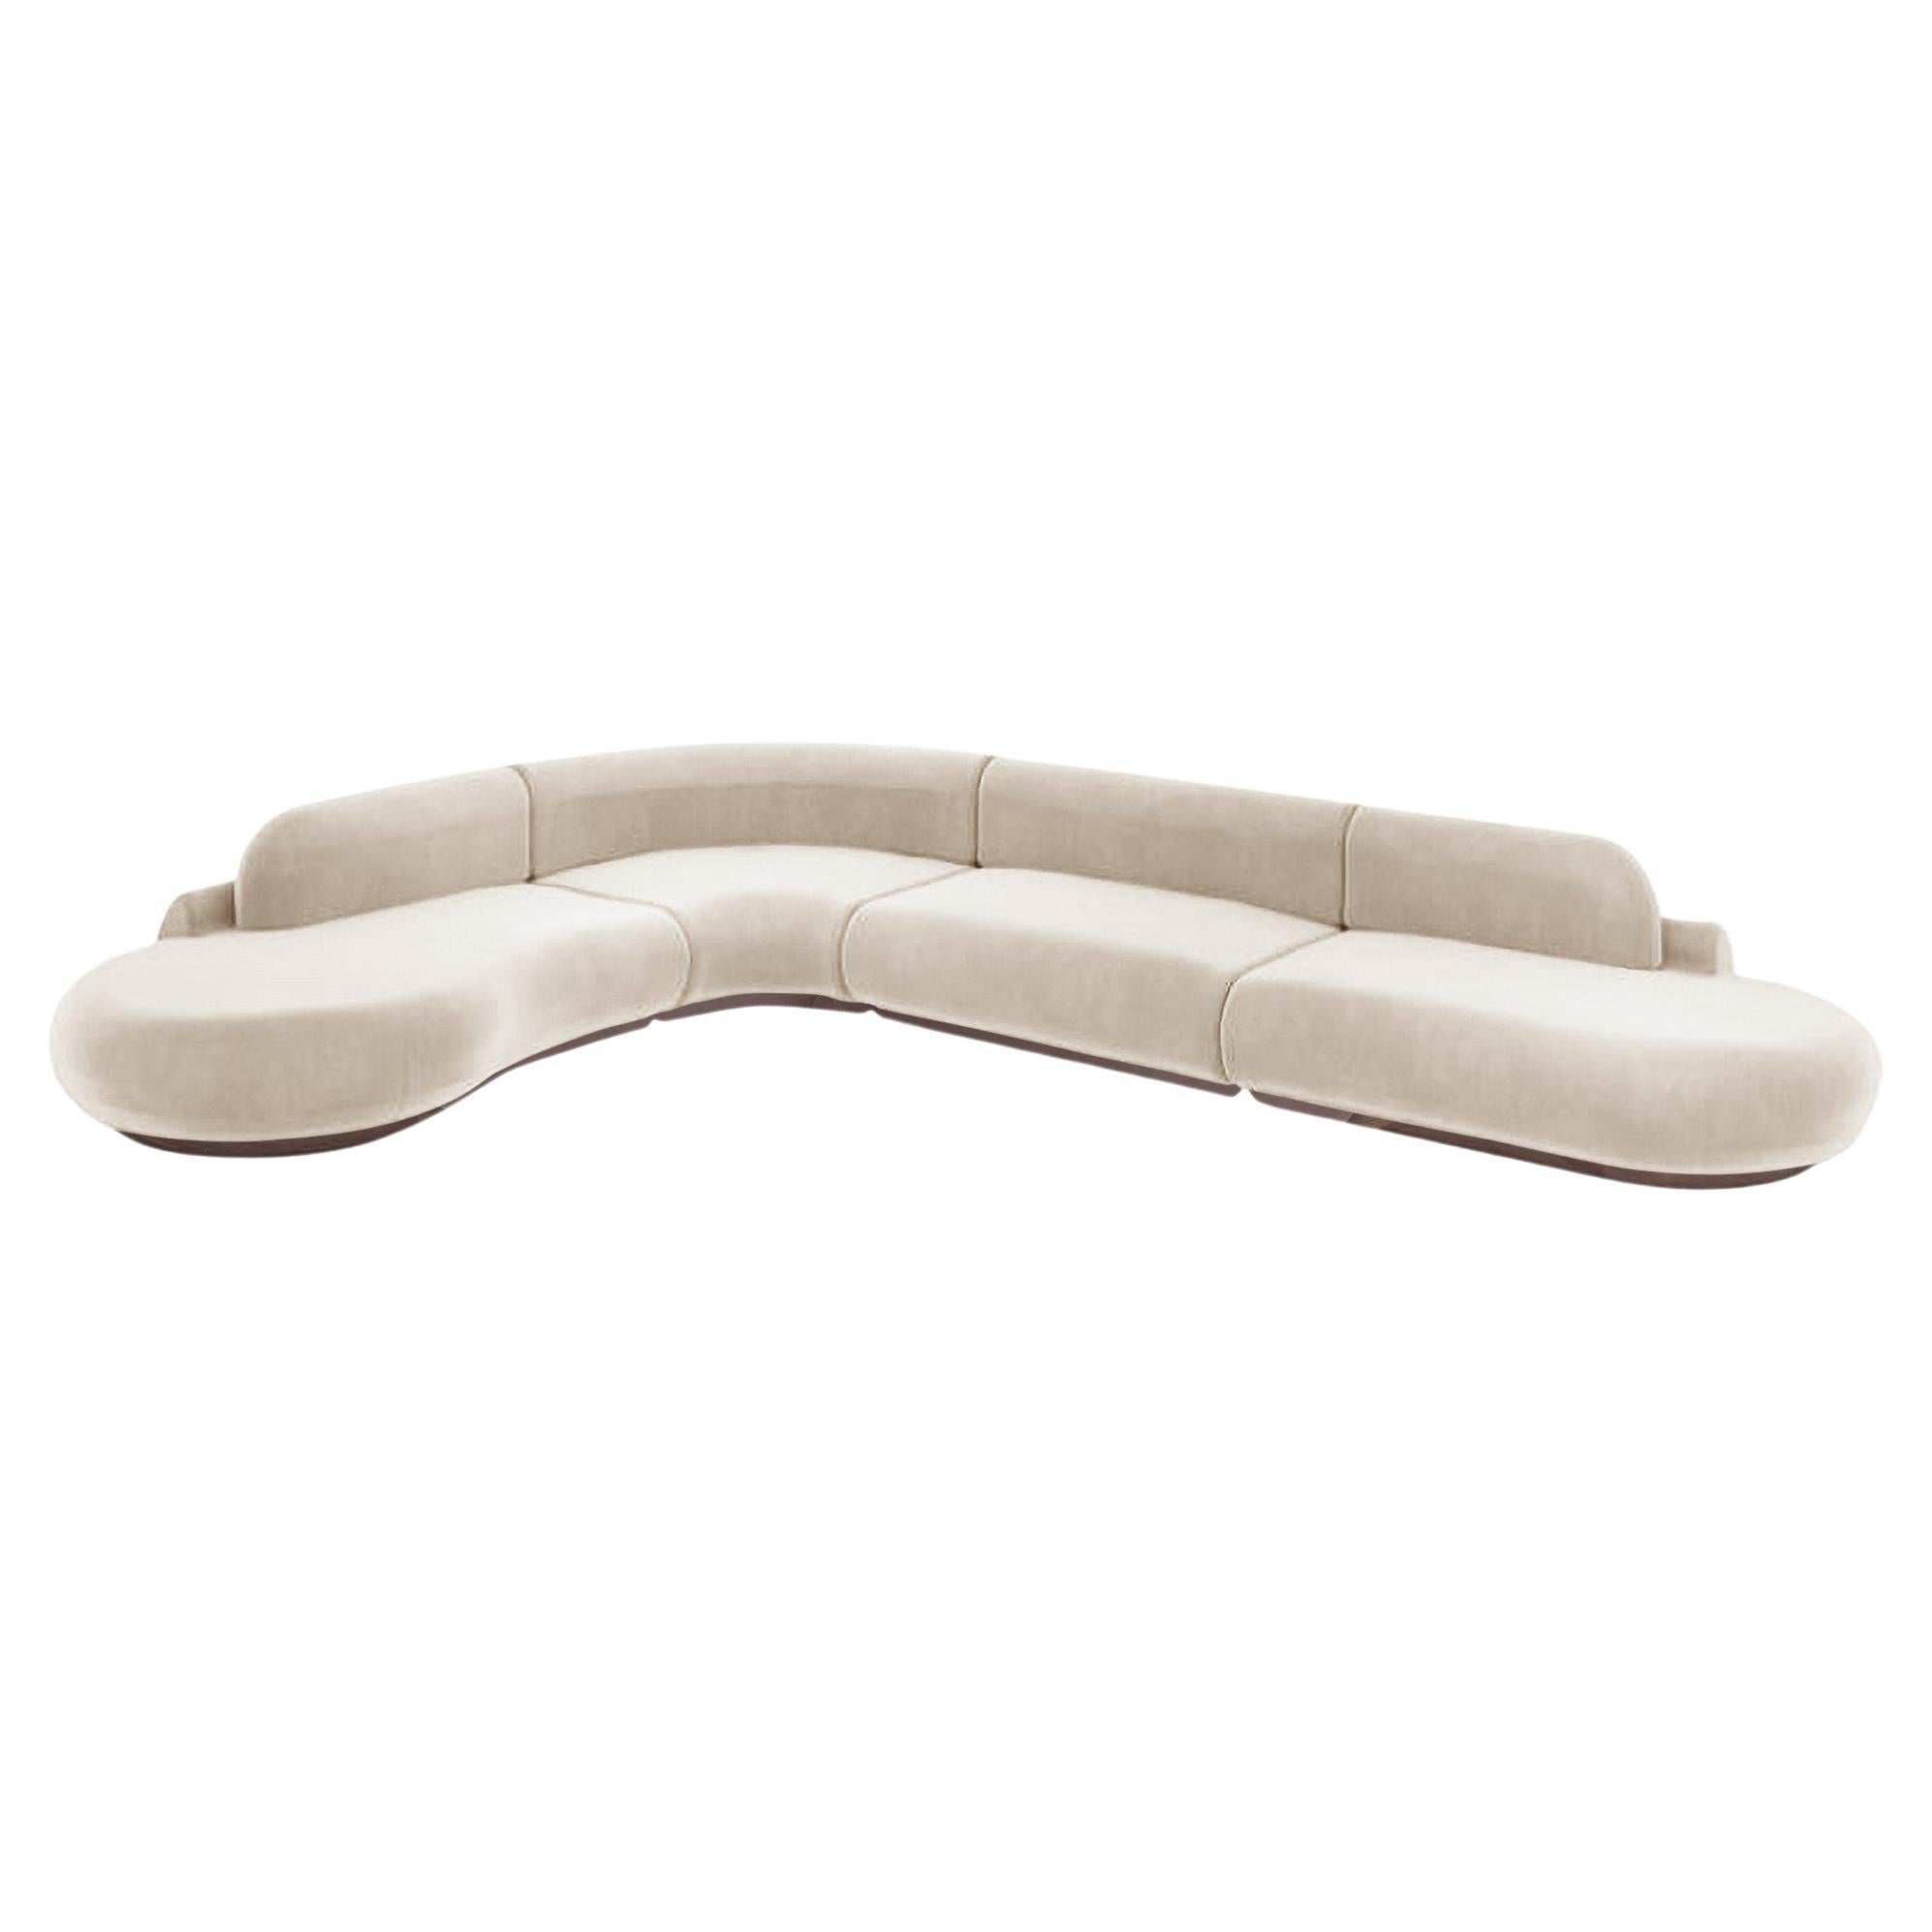 Naked Sectional Sofa, 4 Piece with Beech Ash-056-1 and Boucle Snow For Sale